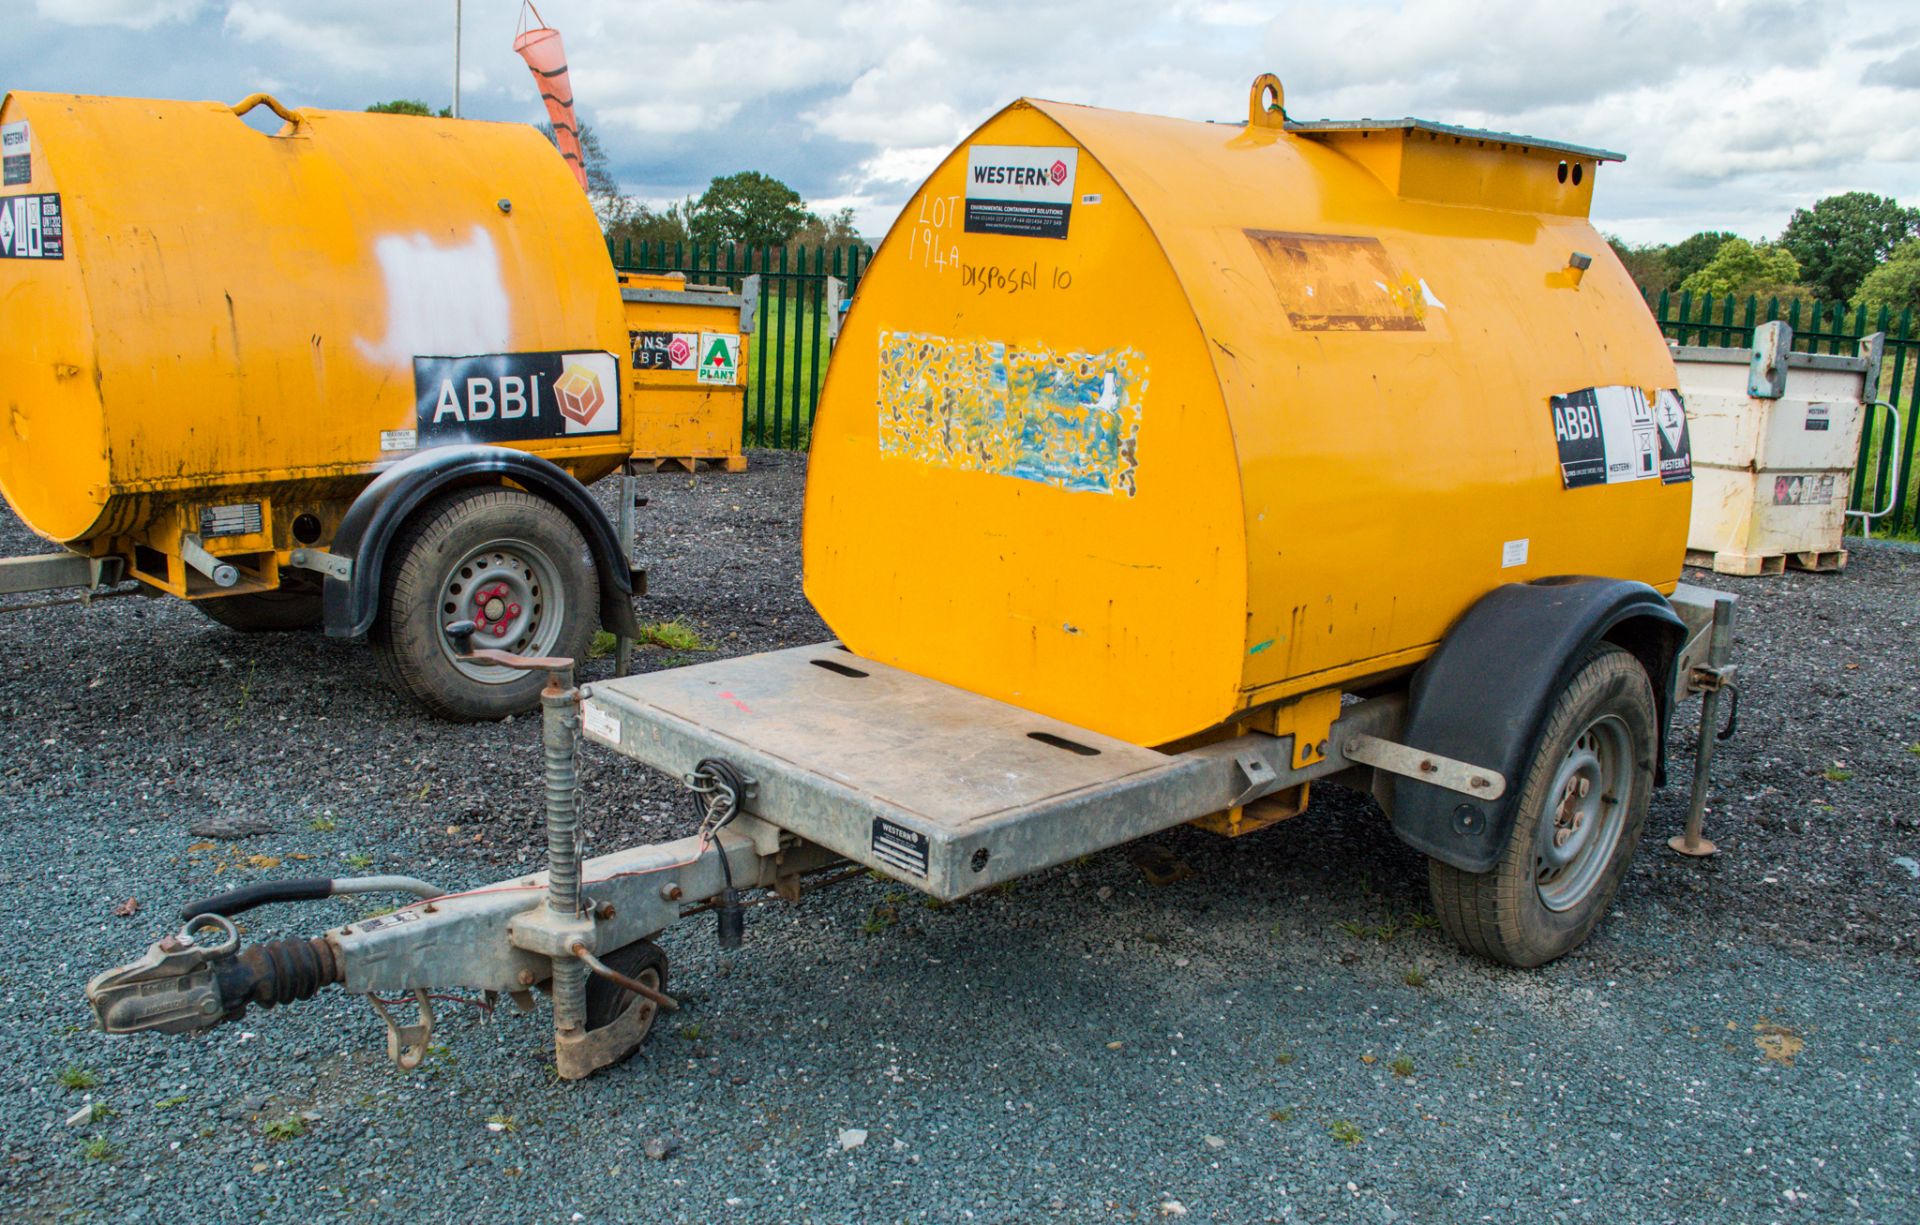 Western Abbi 950 litre fast tow bunded fuel bowser c/w hand pump, delivery hose & trigger nozzle